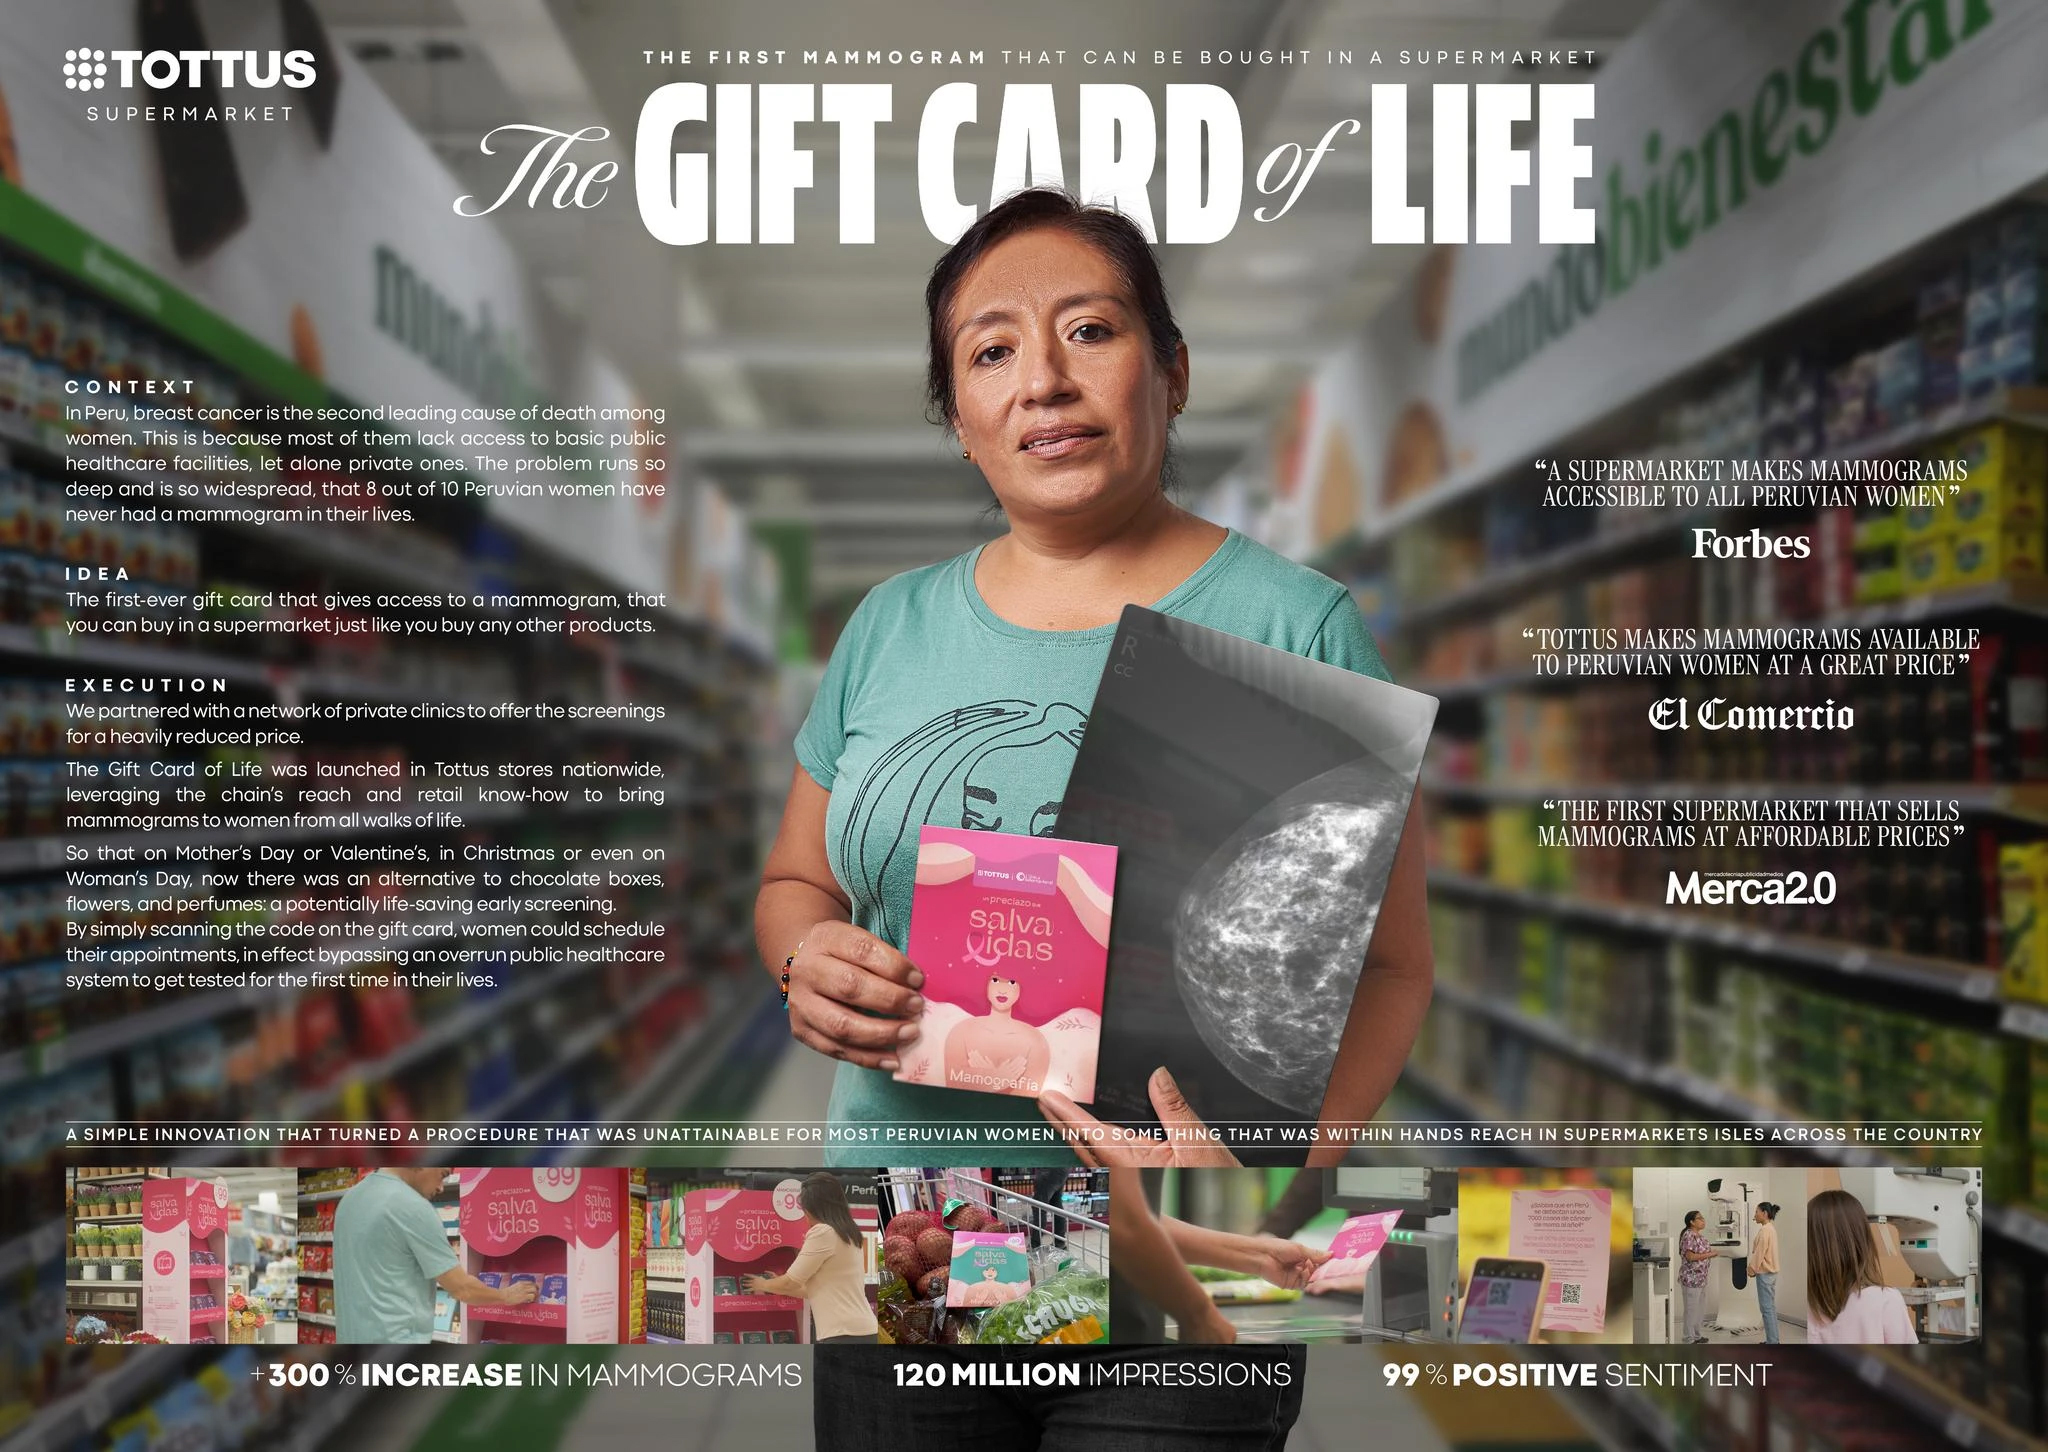 Tottus Supermarket The Gift Card of Life McCann Lima